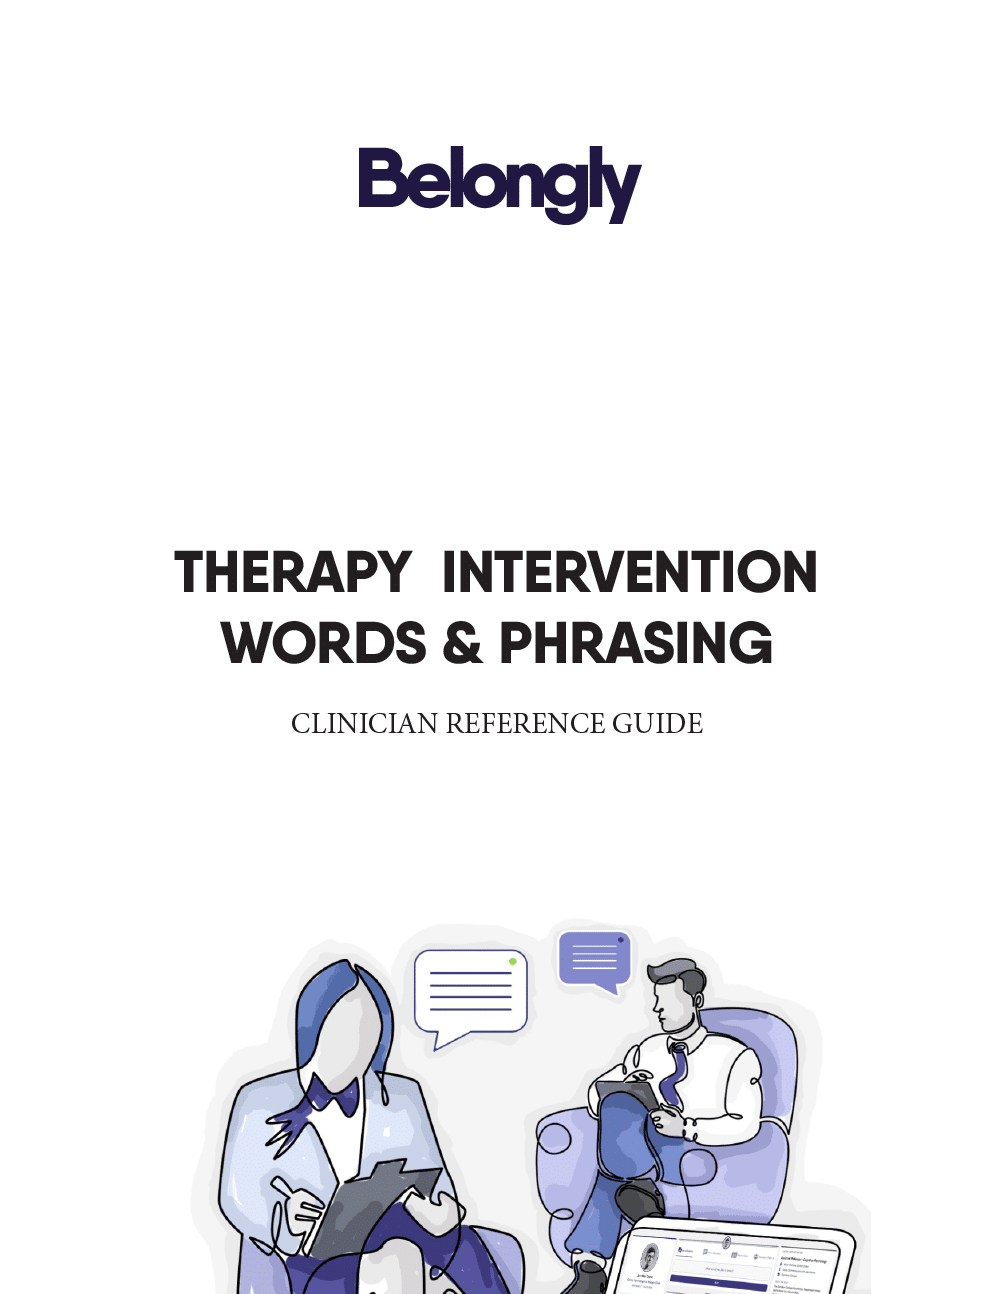 Therapy Intervention Words & Phrasing